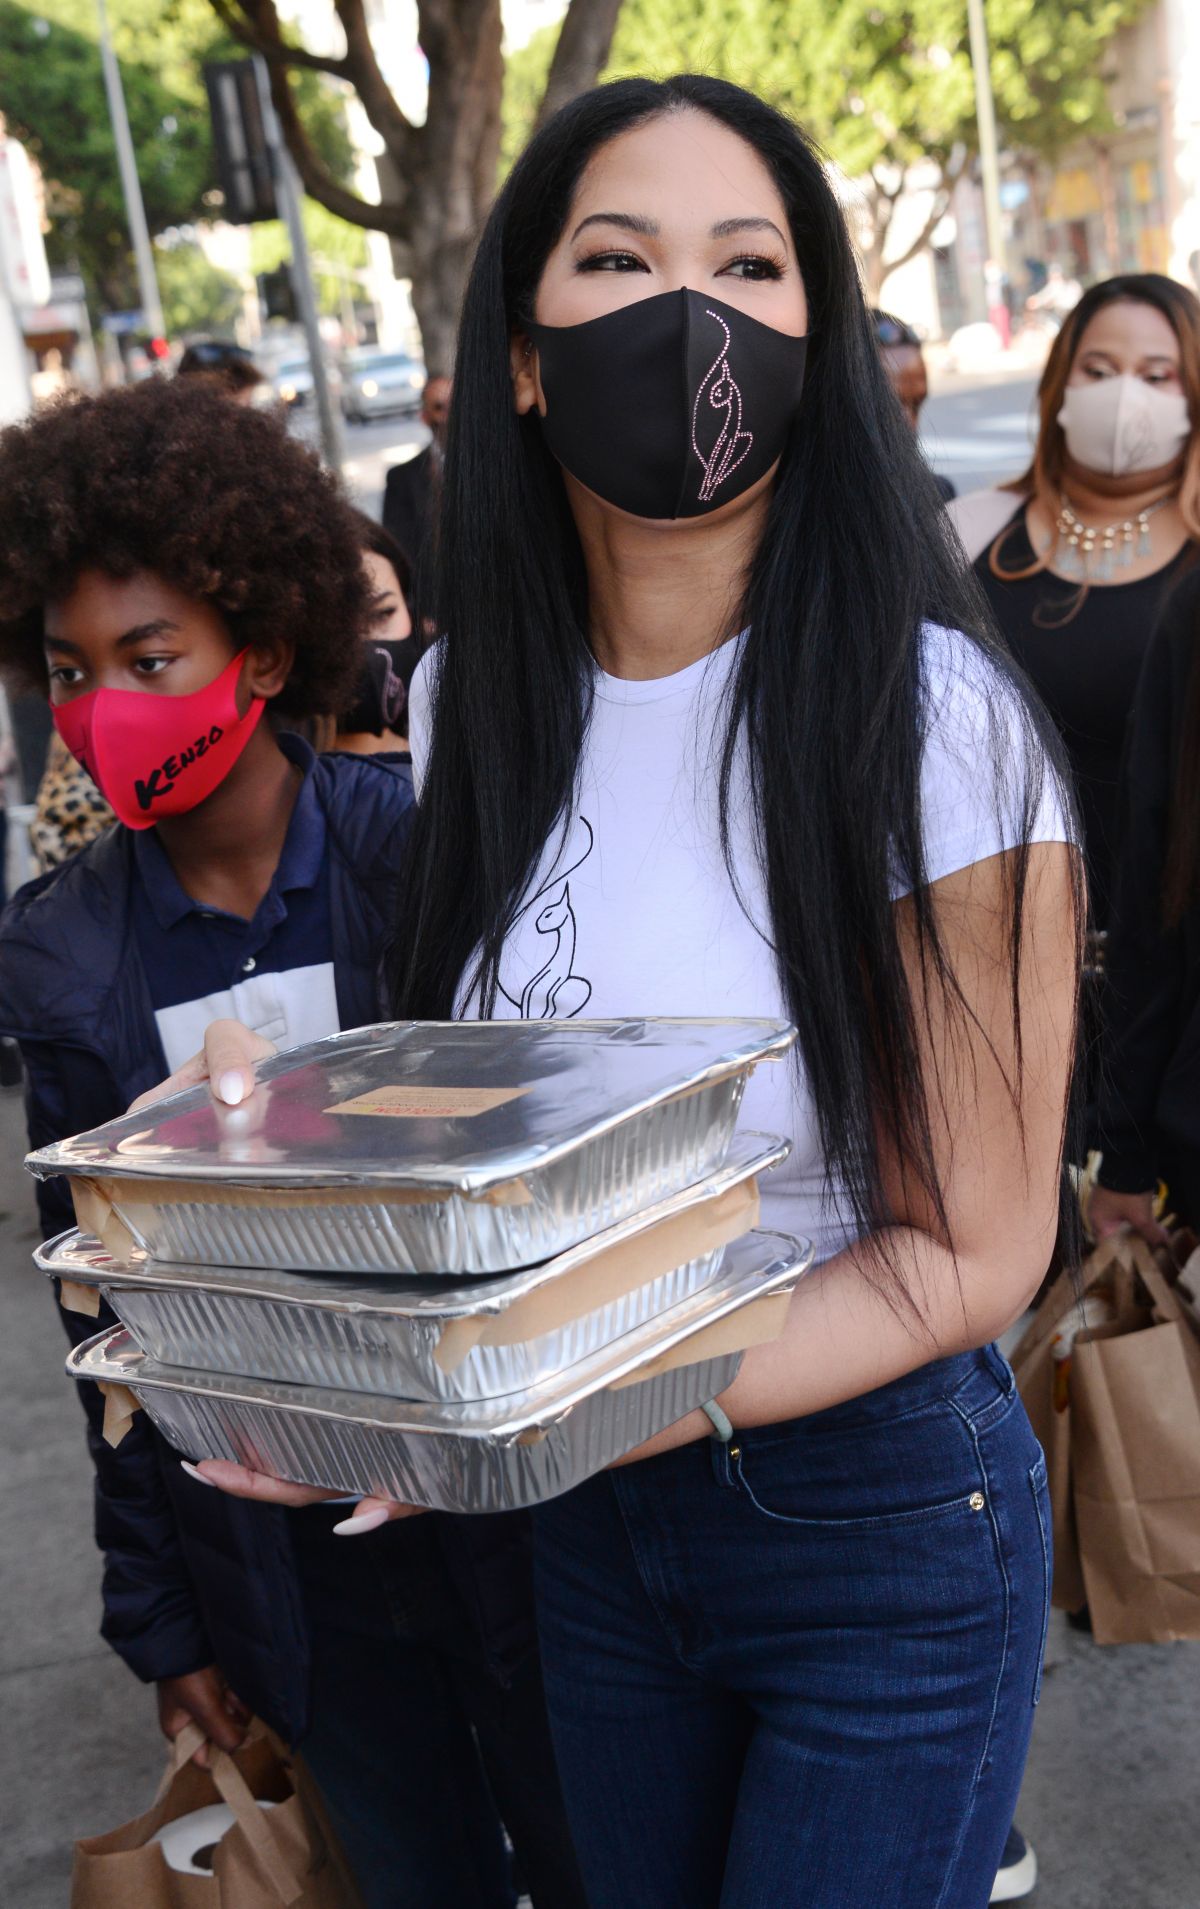 Kimora Lee Simmons Gives Thanksgiving Meals to Homeless in Los Angeles 2020/11/24